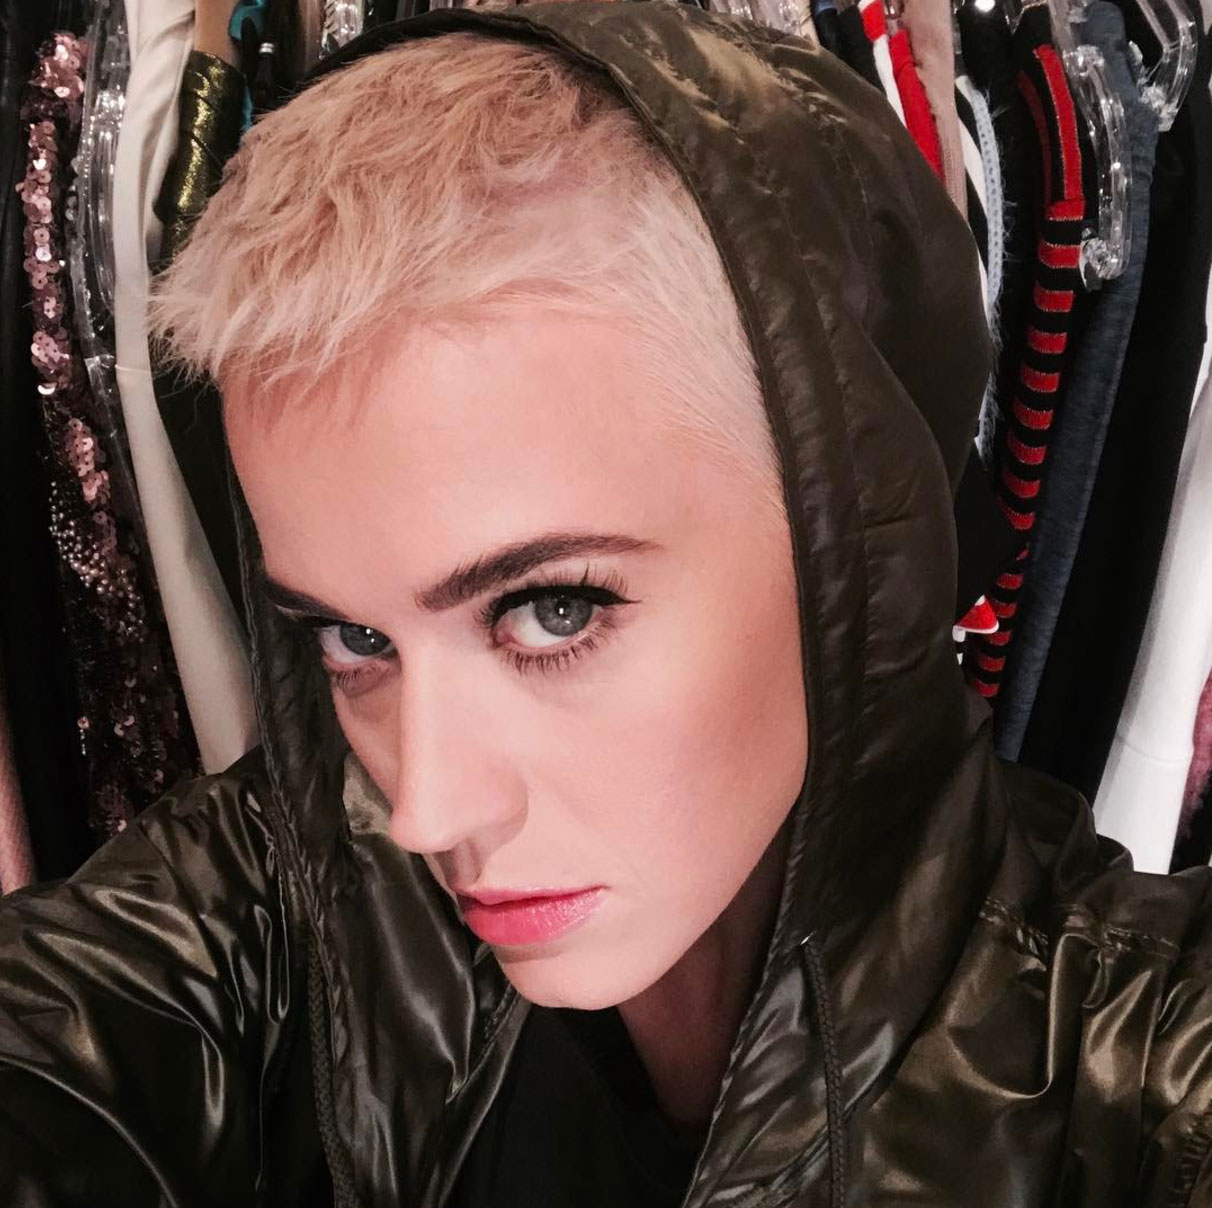 Katy Perry Cuts Off Even More Hair! See Her Almost Buzzed Look